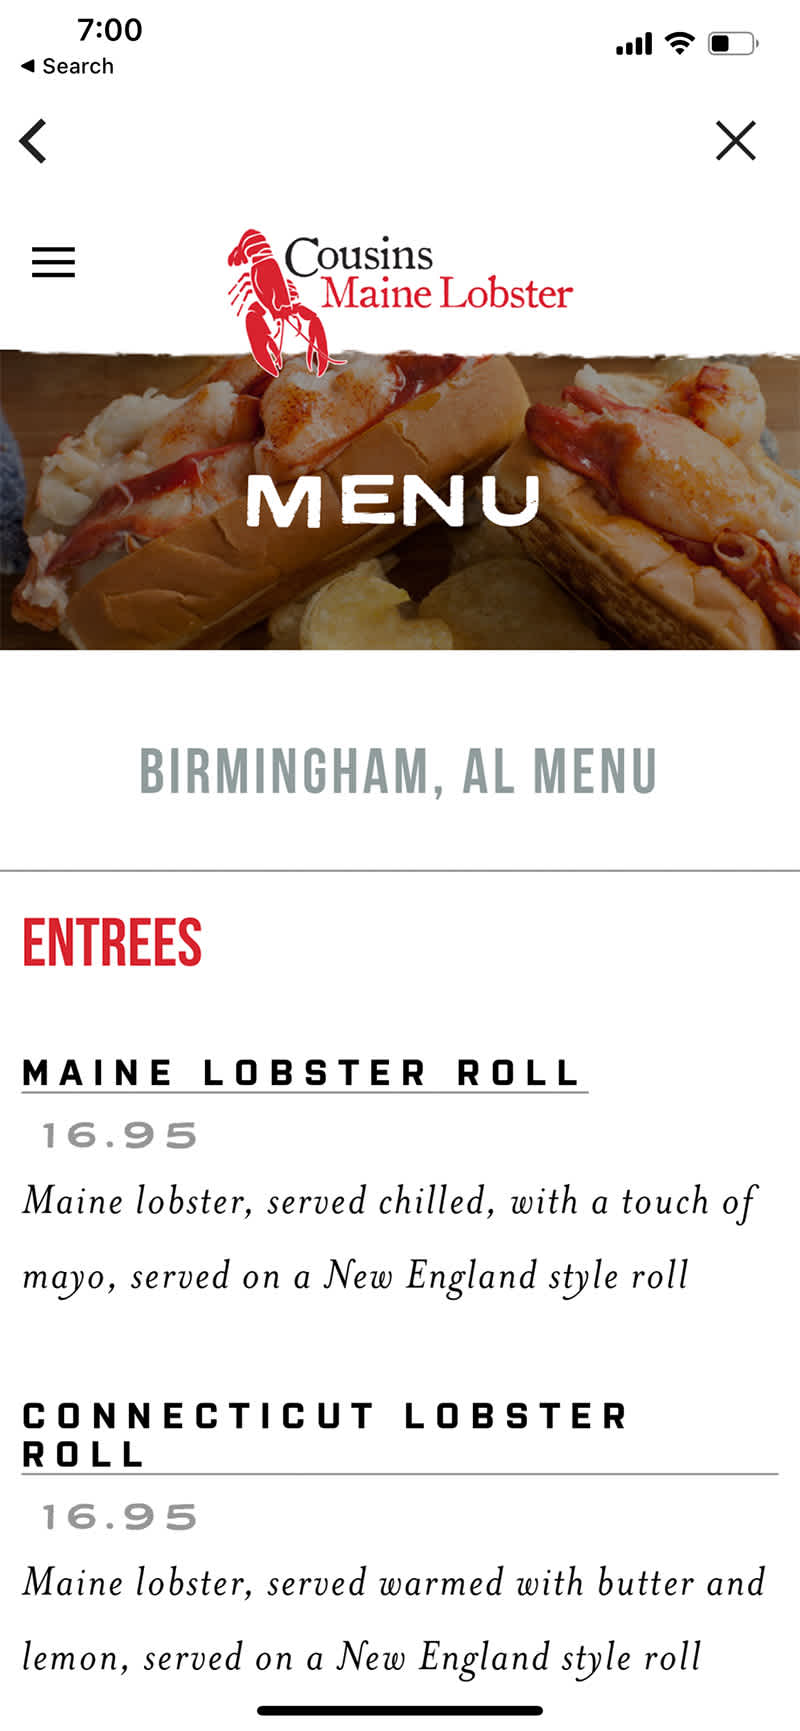 An example image of Cousins Maine Lobster menus appearing in our mobile app.